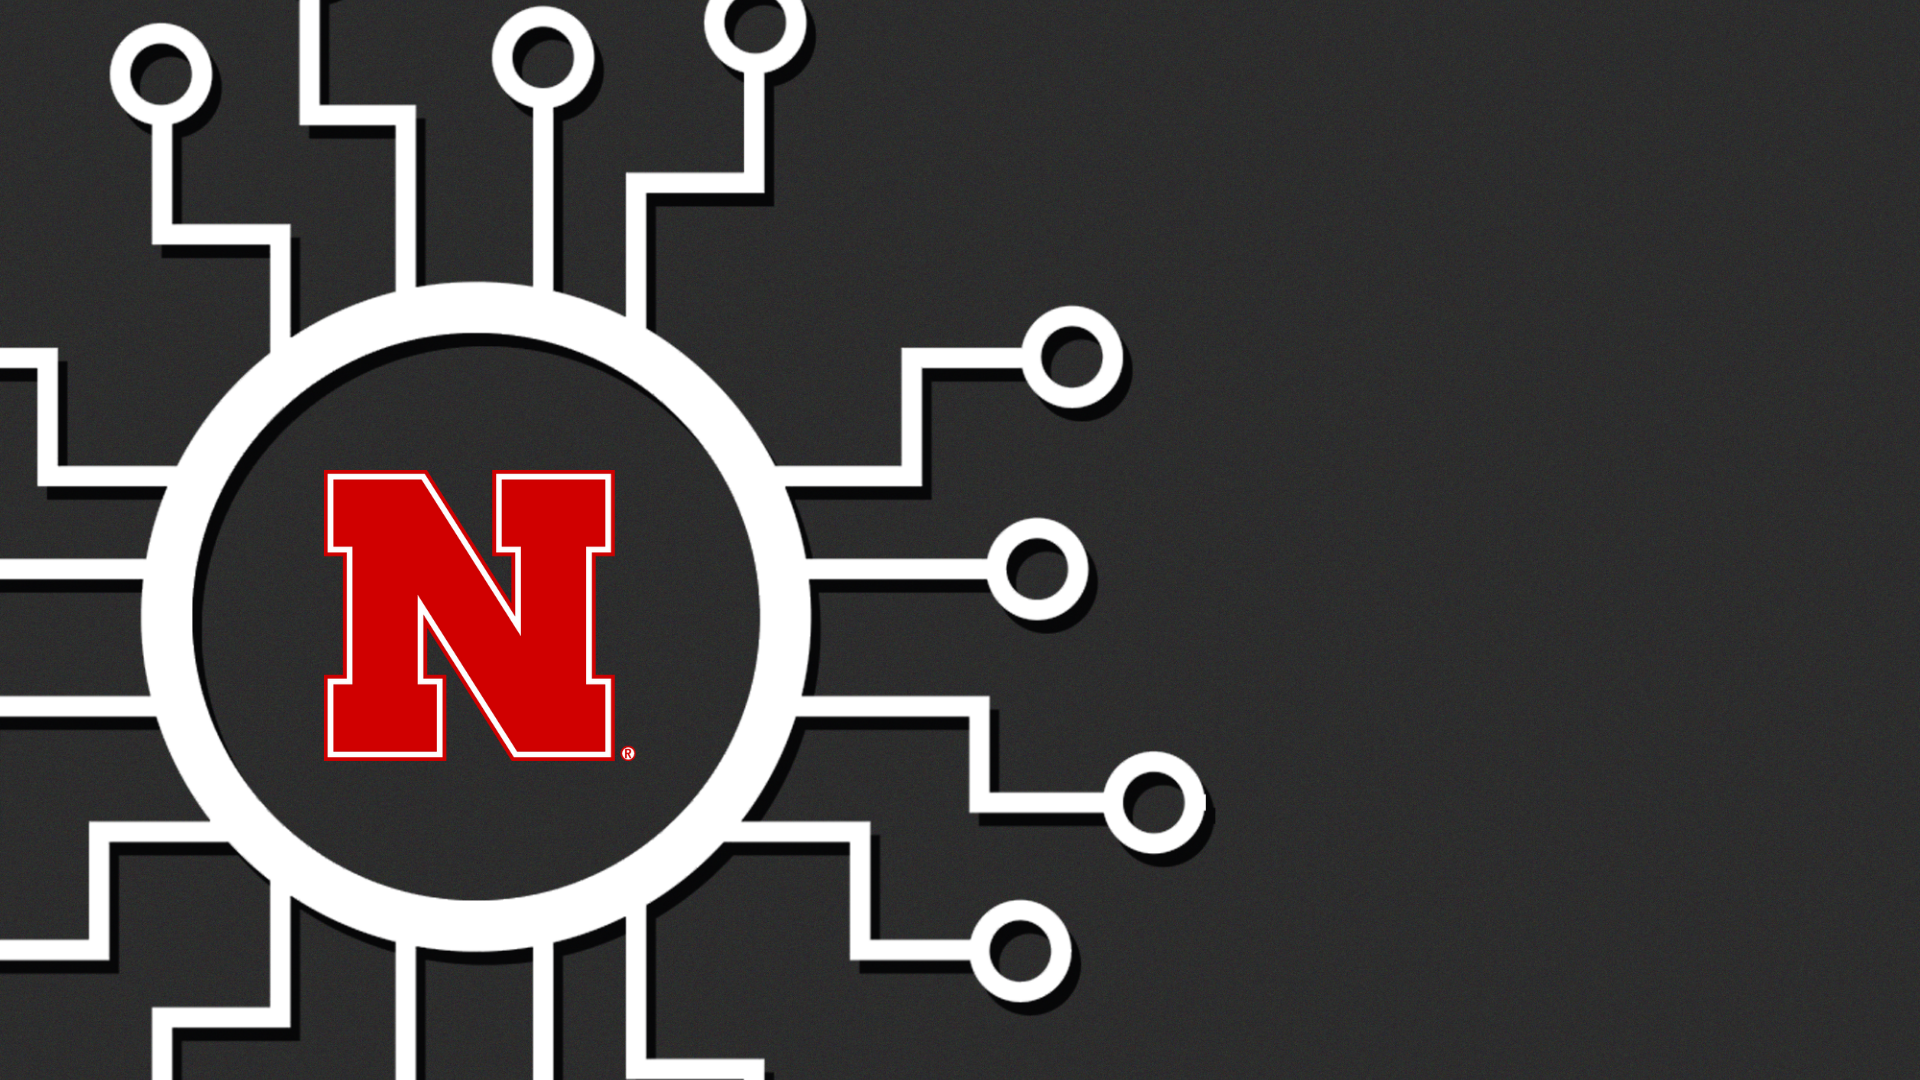 unl logo surrounded by a circuitry pattern